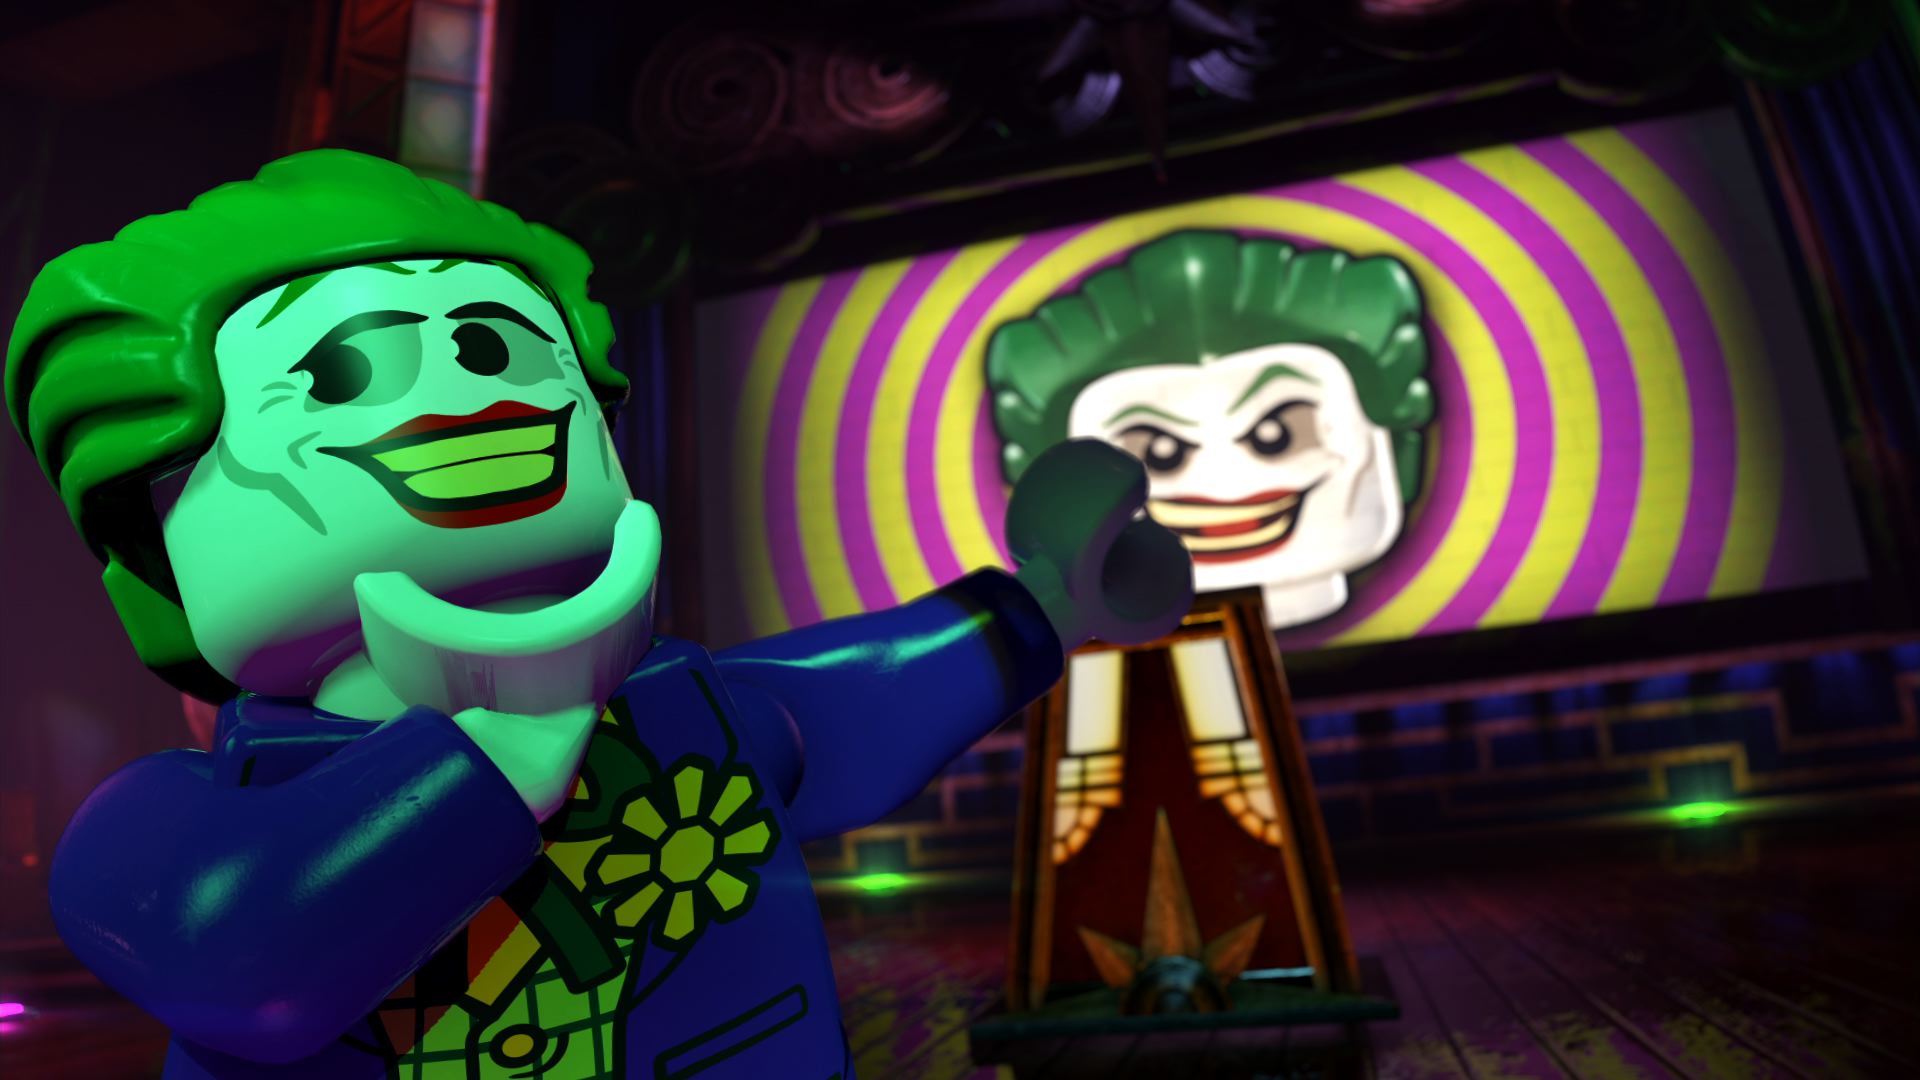 The Lego Batman movie casts The Joker and we approve - SciFiNow - Science  Fiction, Fantasy and Horror